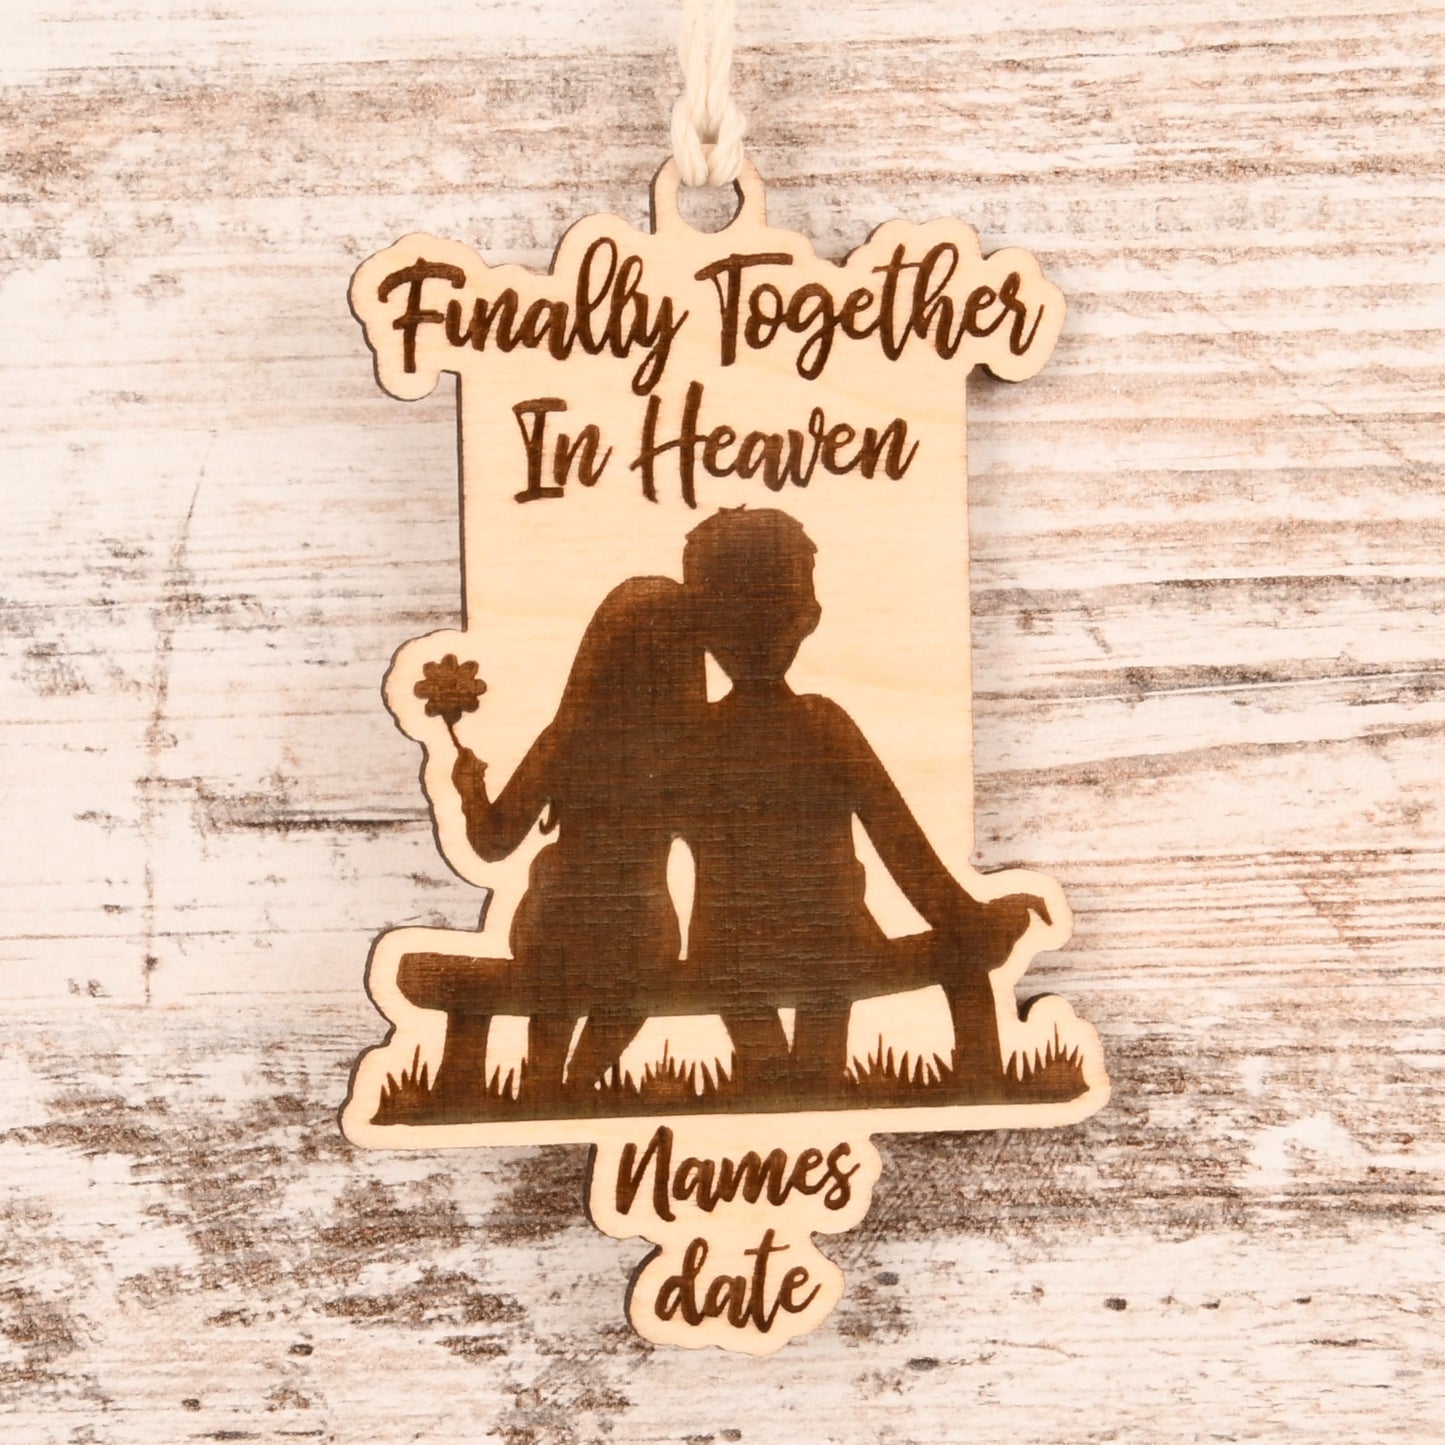 Finally Together Ornament or Mirror Hanger (Couple-001)